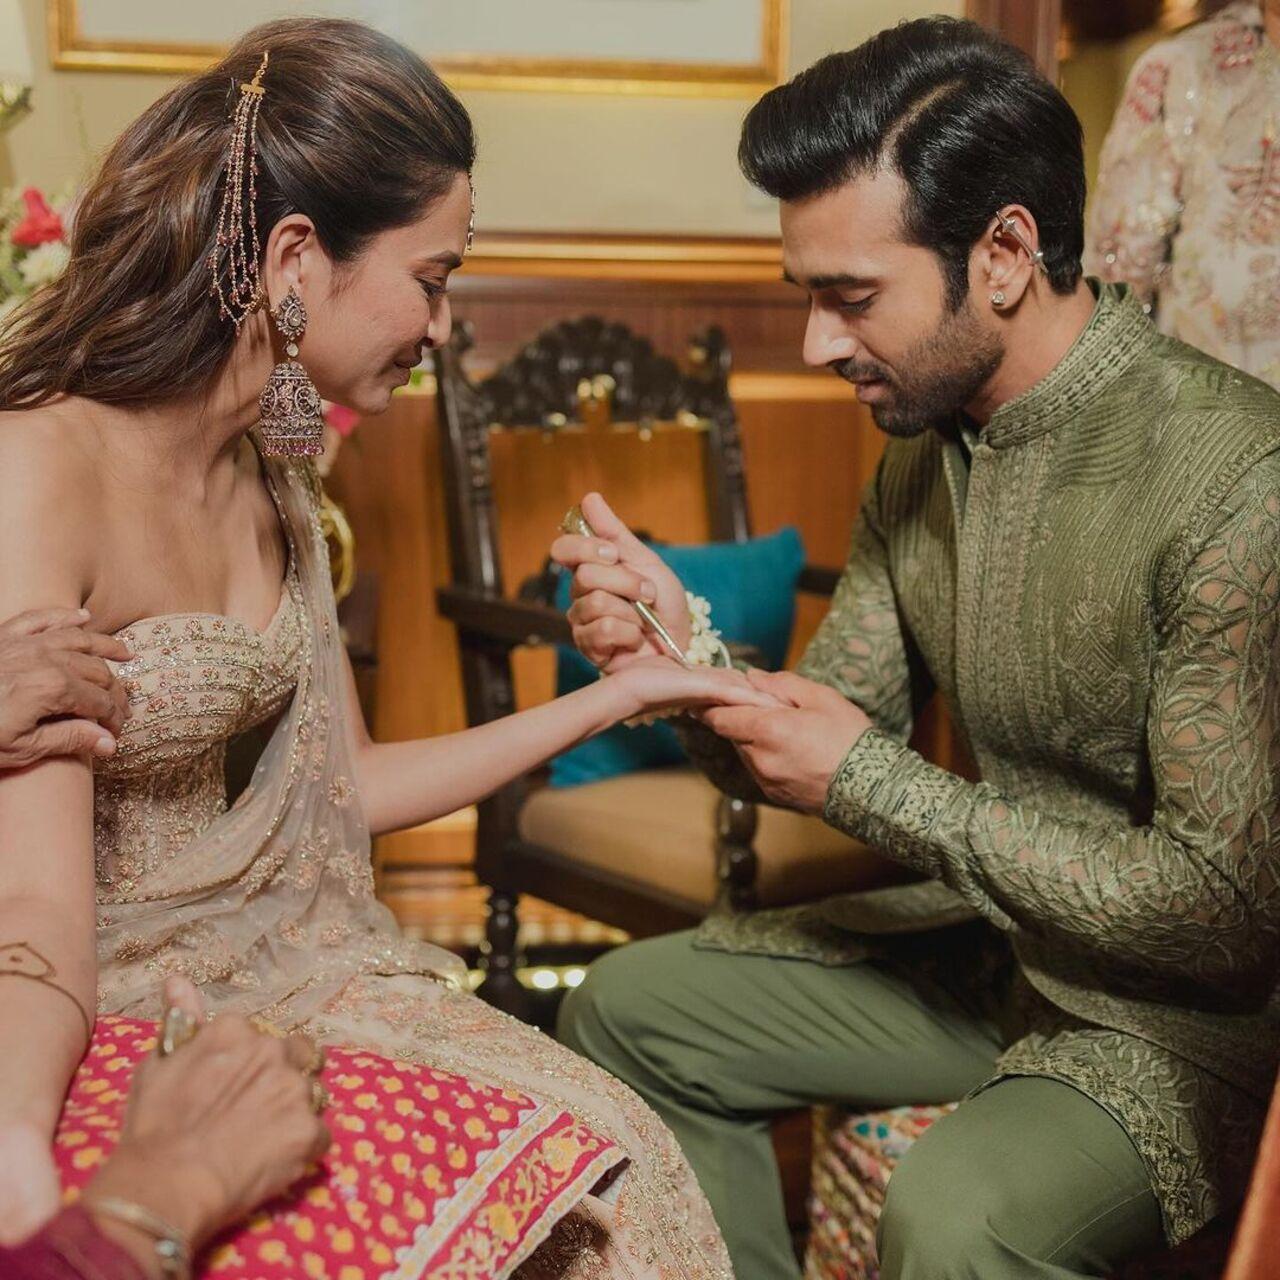 Pulkit Samrat stole our hearts as, during their Mehendi ceremony, the groom put heena on his bride's hand